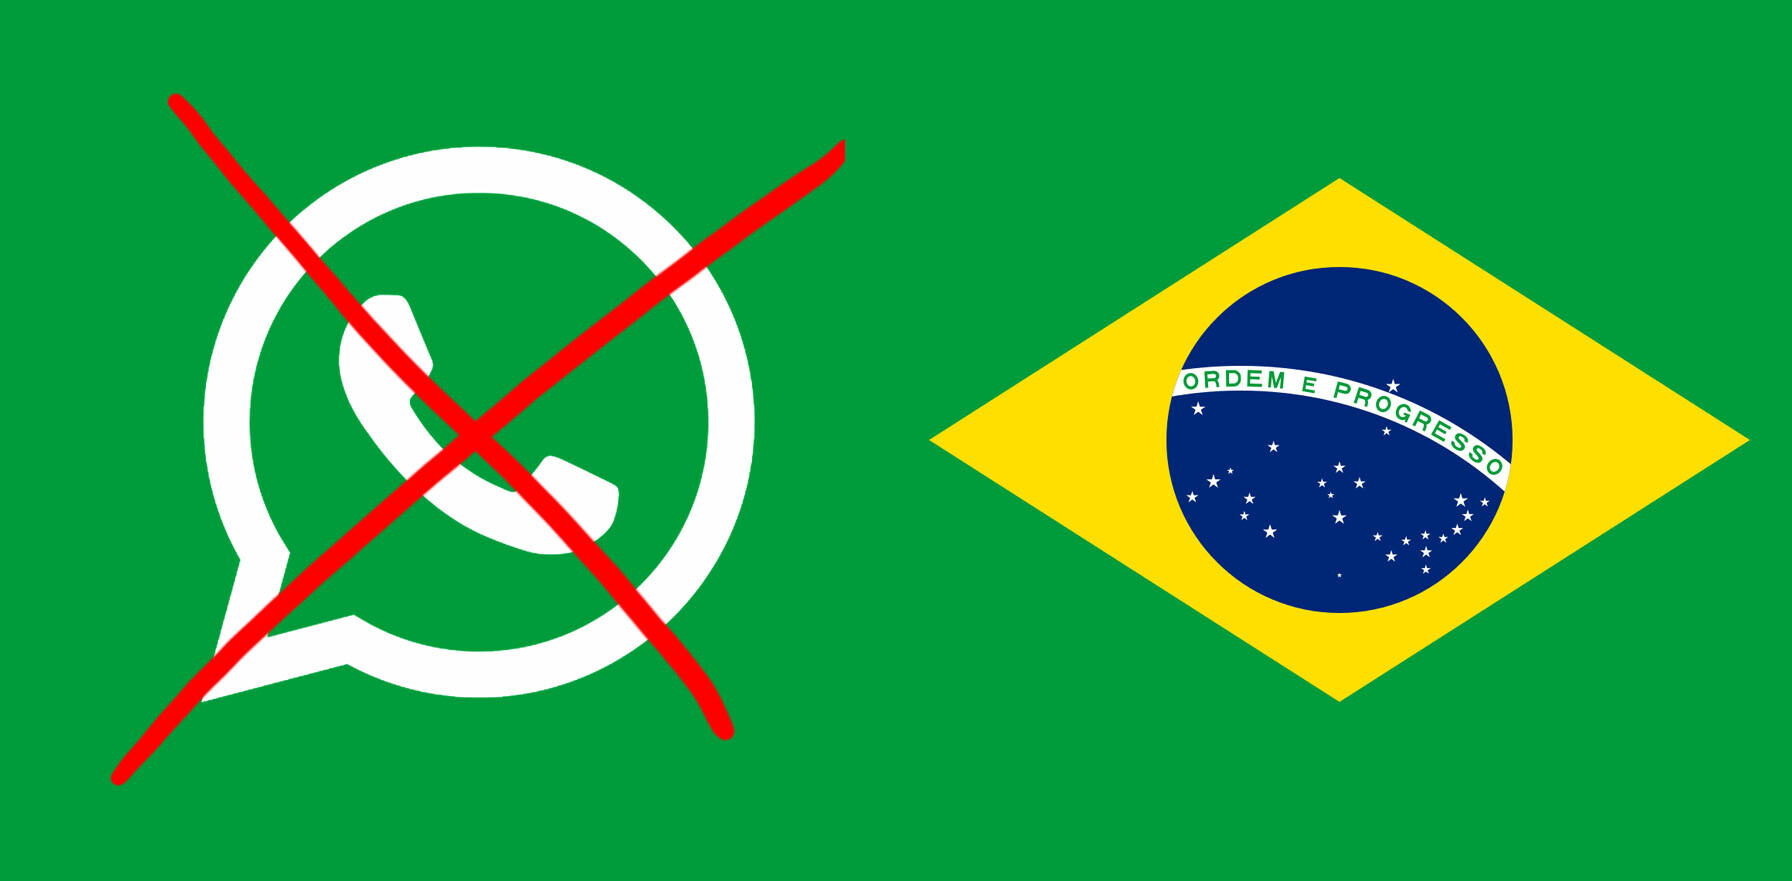 WhatsApp’s new payments service is suspended in Brazil